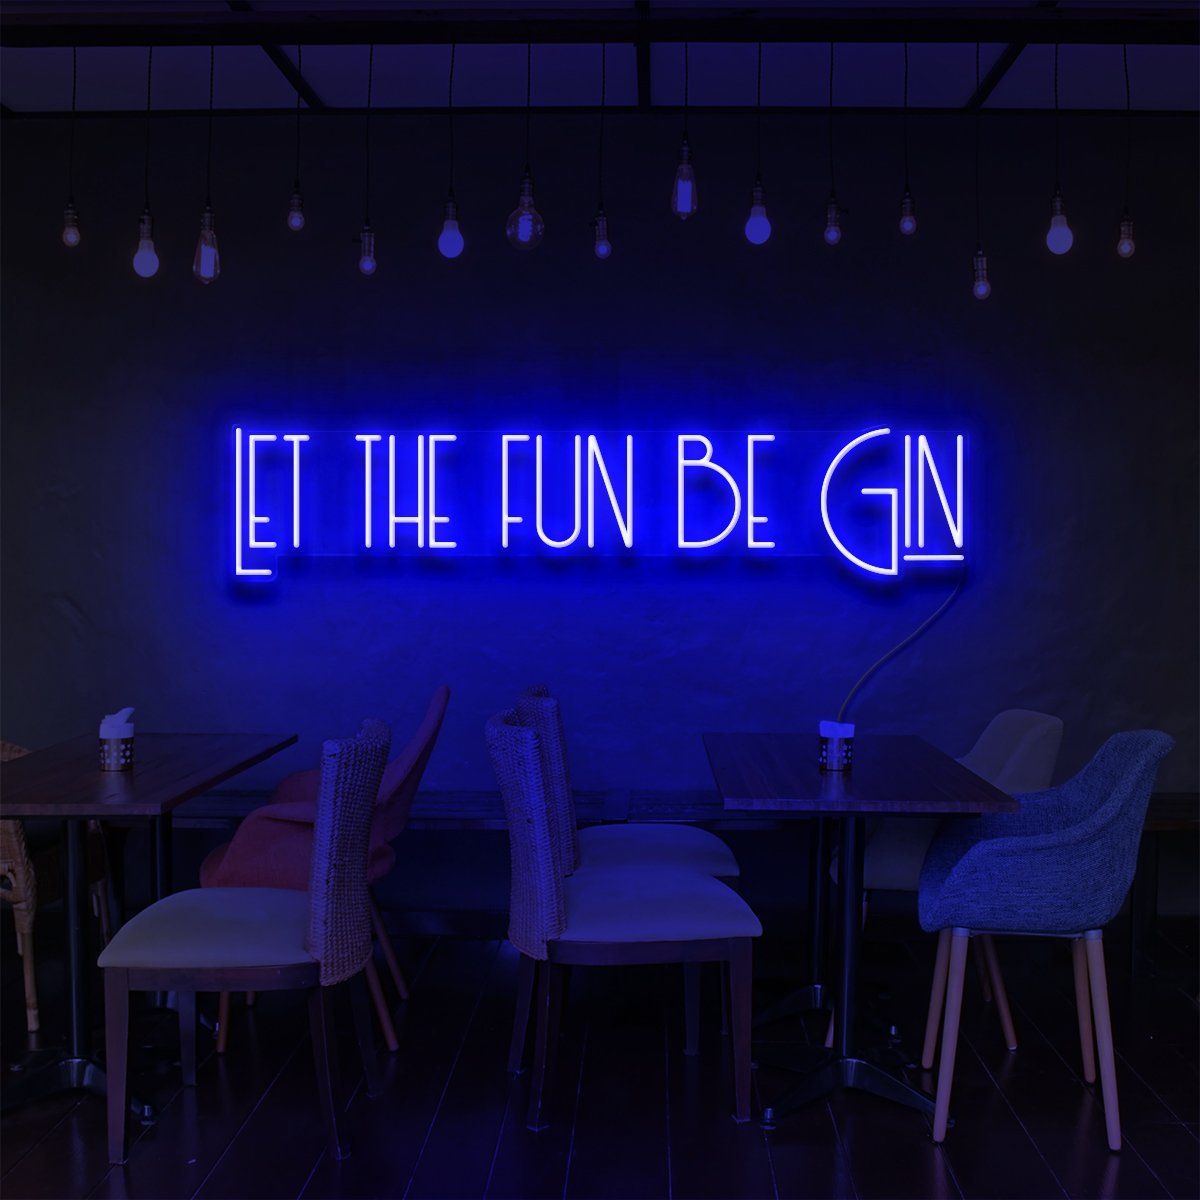 "Let The Fun Be Gin" Neon Sign for Bars & Restaurants 90cm (3ft) / Blue / LED Neon by Neon Icons